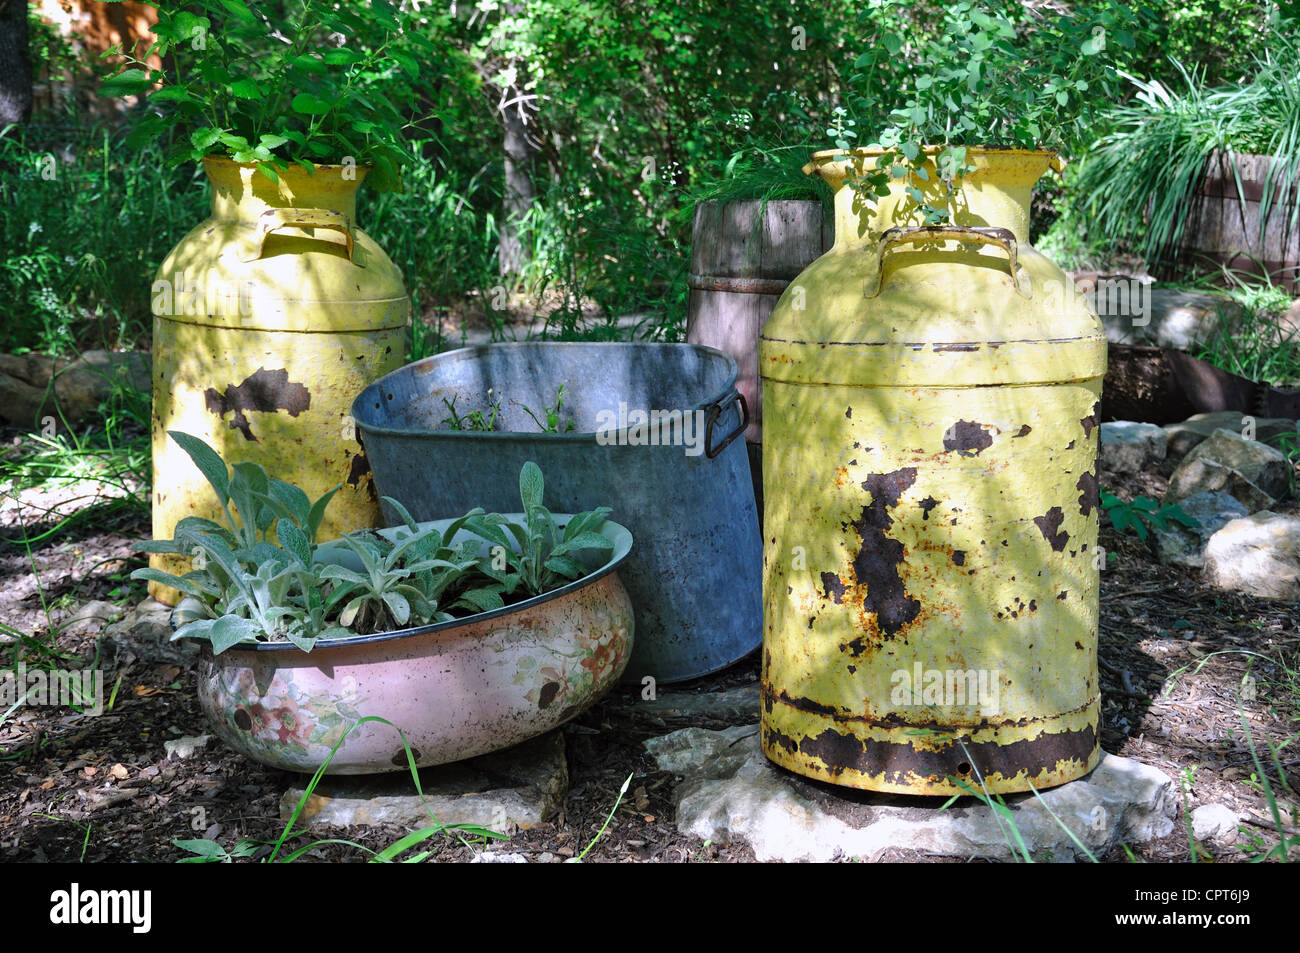 Vintage milk cans and wash basins, Texas, USA Stock Photo